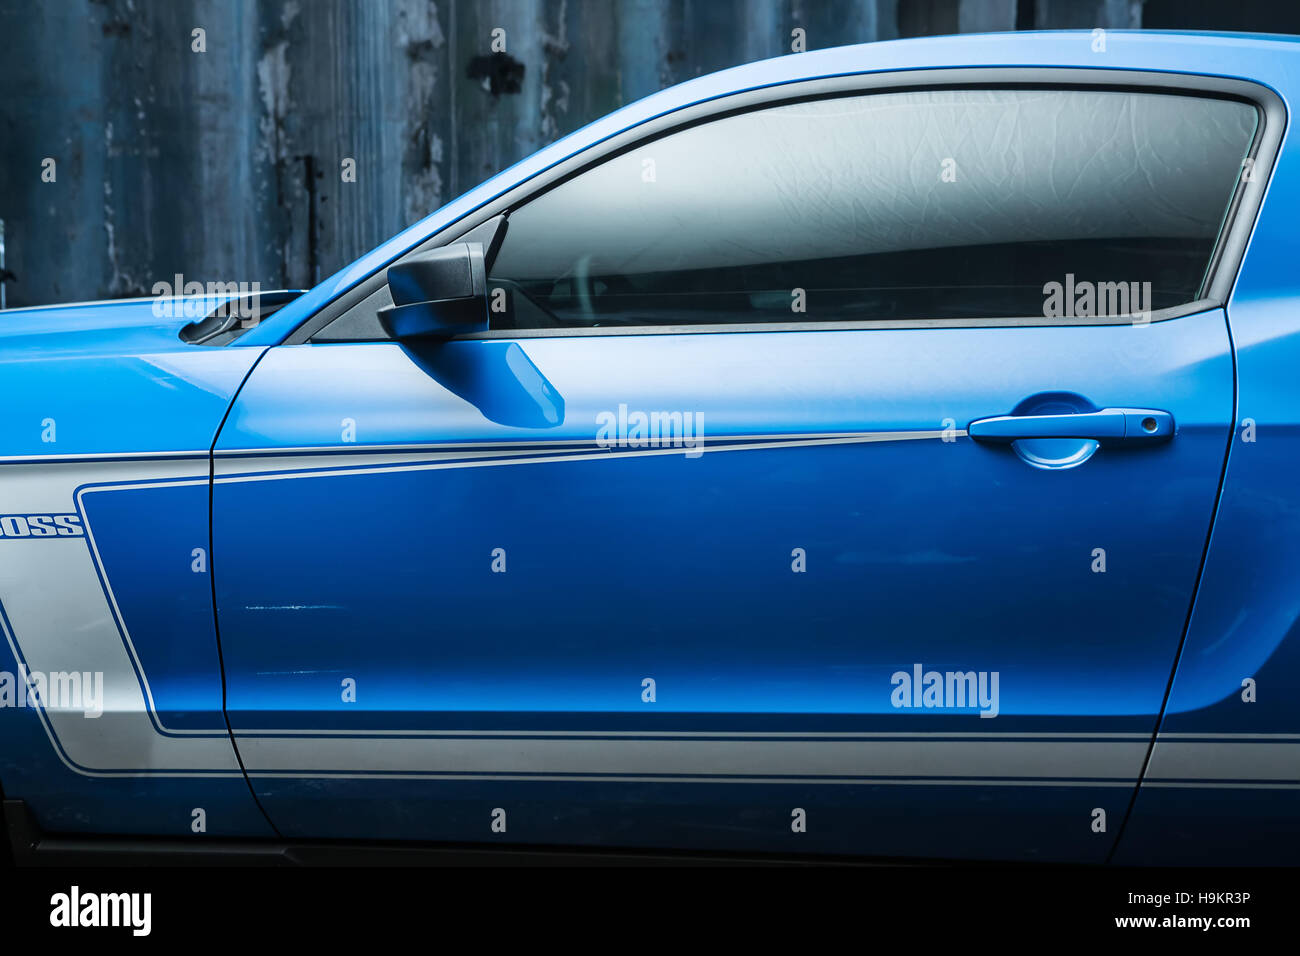 Bleu-blanc Ford Mustang tuning Banque D'Images